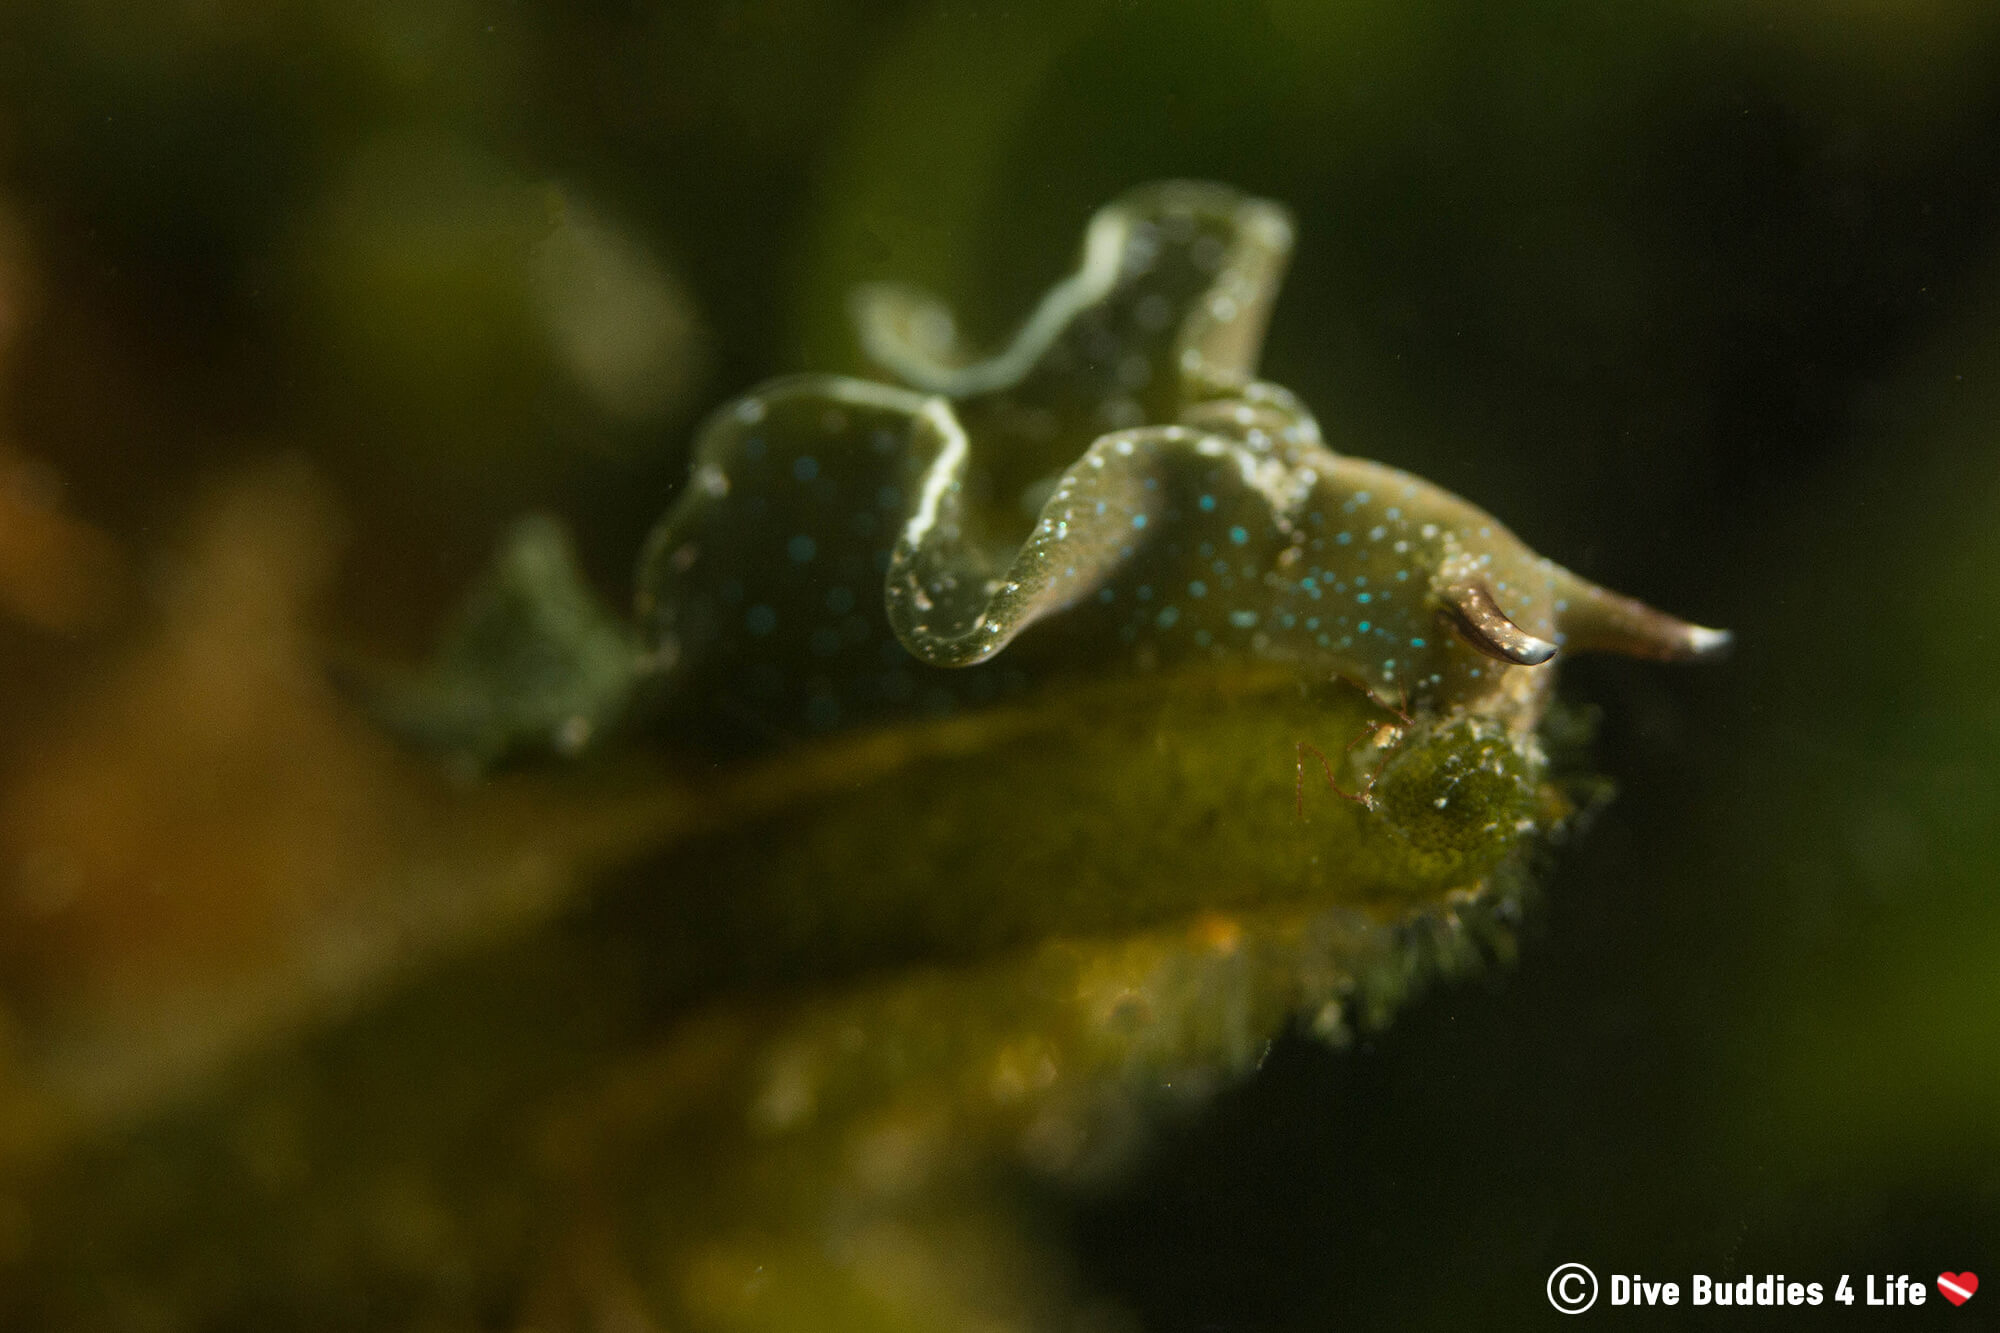 A Green Kelp Like Nudibranch On A Piece Of Dead Mans Fingers In The Netherlands Saltwater Lake